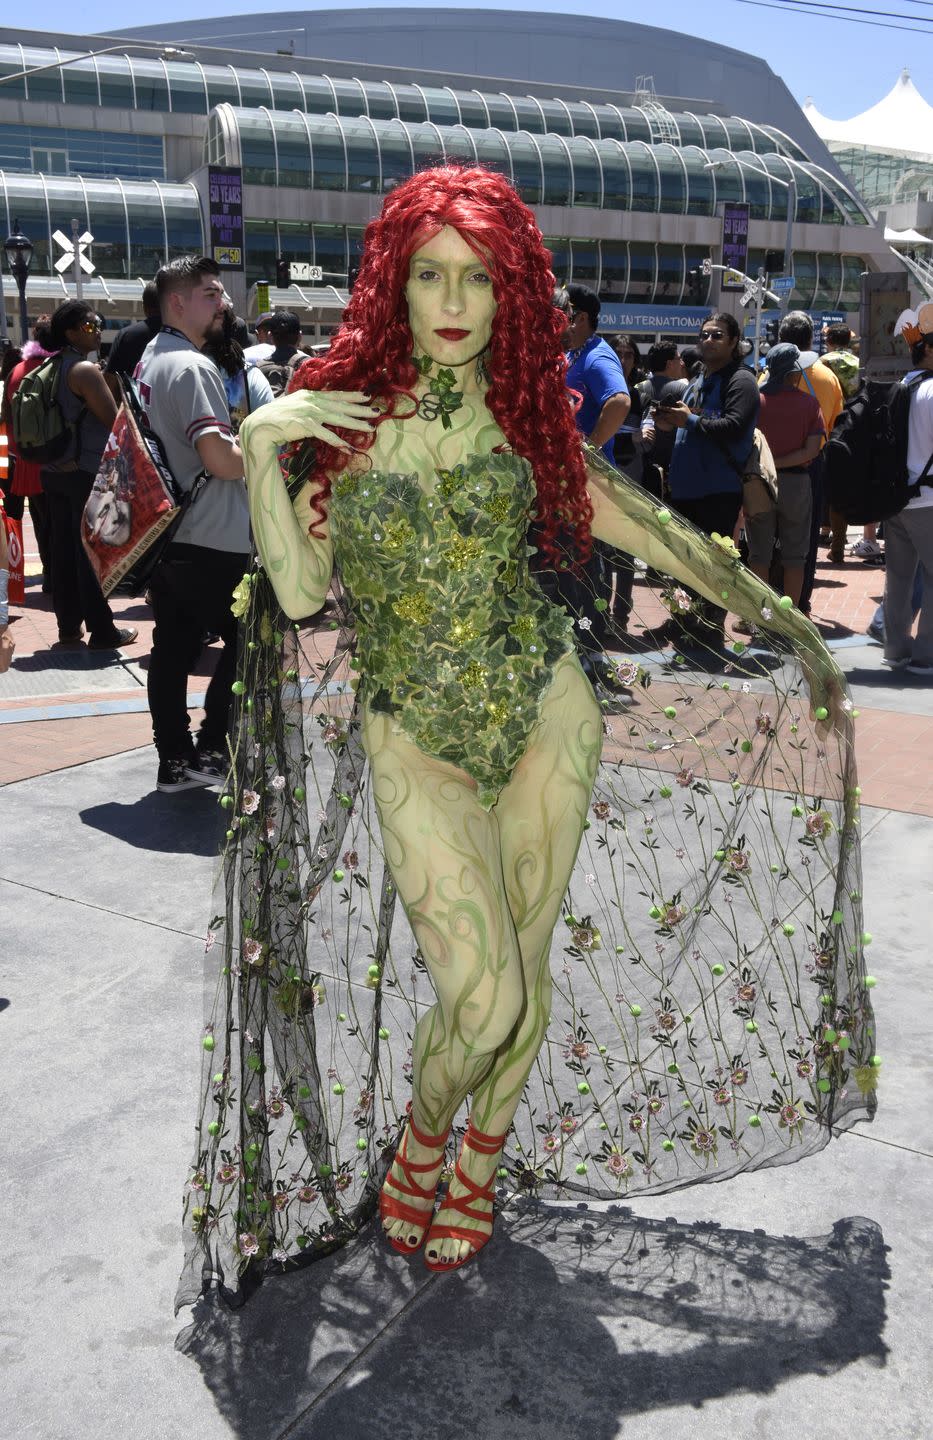 <p>Femme fatale alert. This diva's a stinger! Pair your red tendrils with a perfectly matching green ensemble to stun onlookers.</p><p><a class="link " href="https://www.amazon.com/Secret-Wishes-Batman-Poison-Costume/dp/B002LMINR2?tag=syn-yahoo-20&ascsubtag=%5Bartid%7C10055.g.34302275%5Bsrc%7Cyahoo-us" rel="nofollow noopener" target="_blank" data-ylk="slk:BUY GREEN POISON IVY LOOK">BUY GREEN POISON IVY LOOK</a></p><p><a class="link " href="https://www.amazon.com/Mehron-Makeup-Paradise-Paint-Amazon/dp/B00VF3AF7Y?tag=syn-yahoo-20&ascsubtag=%5Bartid%7C10055.g.34302275%5Bsrc%7Cyahoo-us" rel="nofollow noopener" target="_blank" data-ylk="slk:BUY GREEN BODY PAINT">BUY GREEN BODY PAINT</a></p><p><a class="link " href="https://www.amazon.com/Maybelline-SuperStay-Long-lasting-Pigmented-Exhilarator/dp/B08H4FSGDX?tag=syn-yahoo-20&ascsubtag=%5Bartid%7C10055.g.34302275%5Bsrc%7Cyahoo-us" rel="nofollow noopener" target="_blank" data-ylk="slk:BUY RED LIP WEAR">BUY RED LIP WEAR</a></p><p><a class="link " href="https://www.amazon.com/ColorGround-Long-Wavy-Halloween-Cosplay/dp/B0751CL6G9?tag=syn-yahoo-20&ascsubtag=%5Bartid%7C10055.g.34302275%5Bsrc%7Cyahoo-us" rel="nofollow noopener" target="_blank" data-ylk="slk:BUY WAVY RED WIG">BUY WAVY RED WIG</a></p>